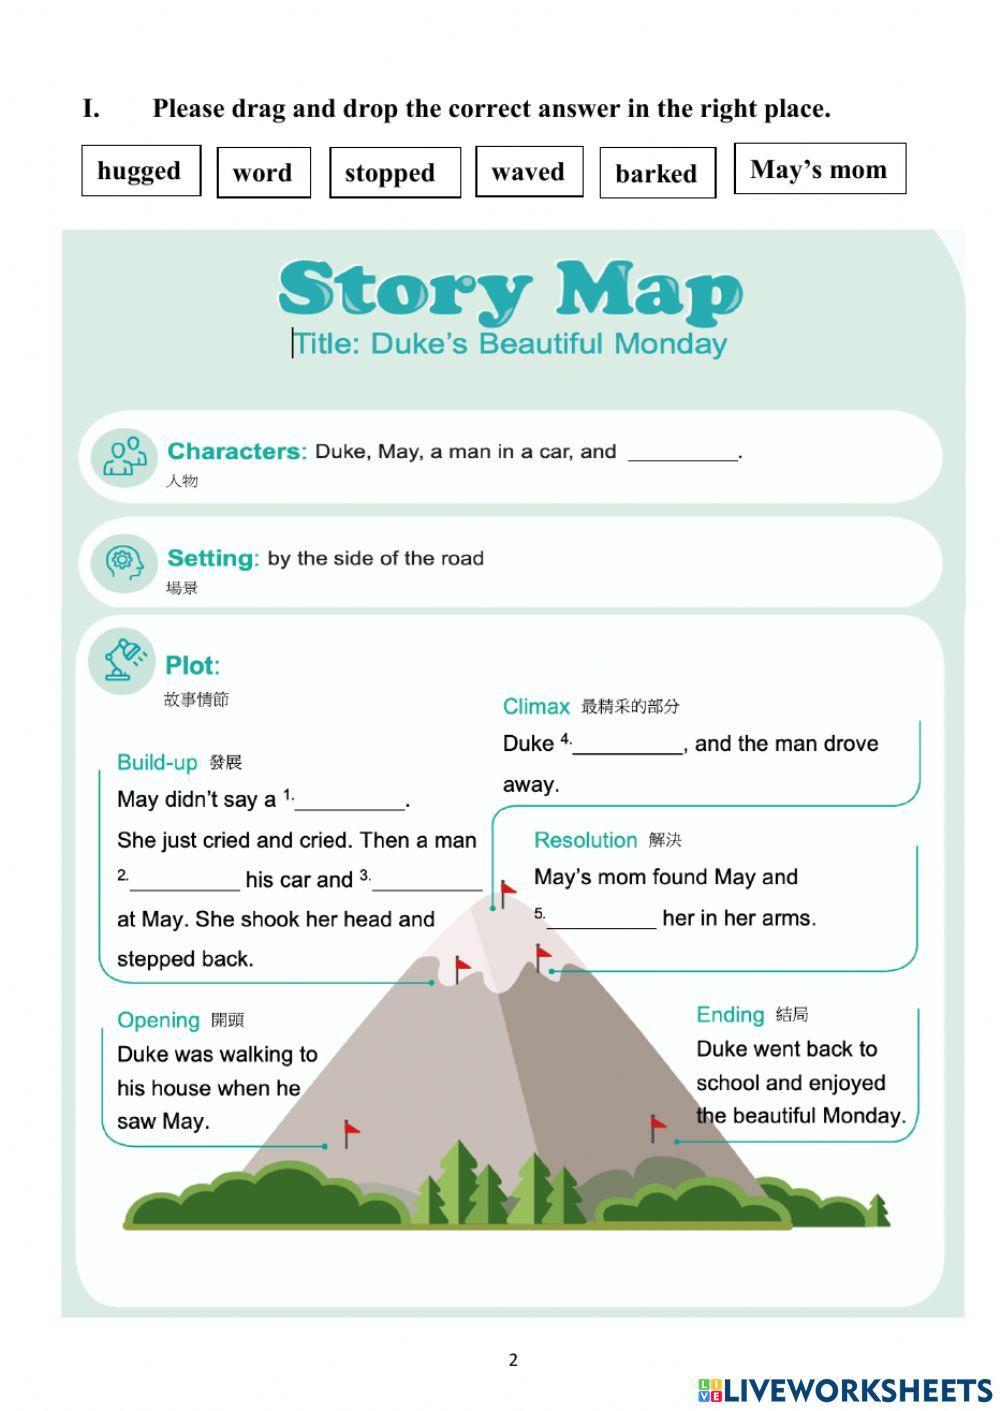 Story map